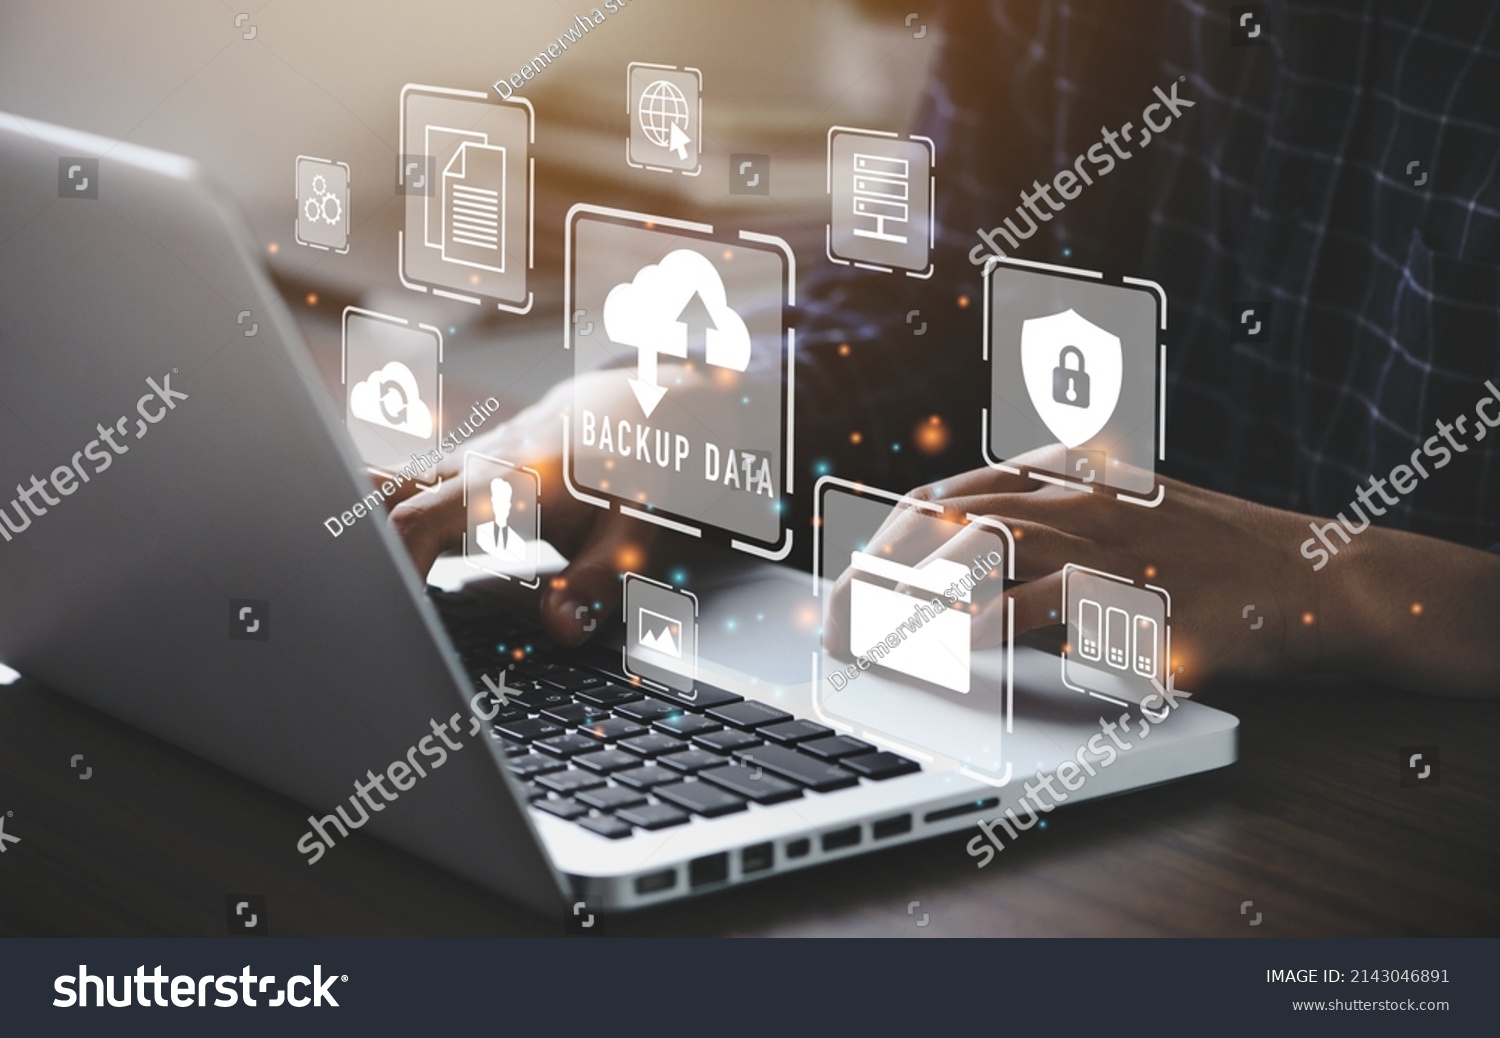 Businessman using a computer to backup storage data Internet technology concept for backup online documentation database and digital file storage system or software,file access, doc sharing. #2143046891